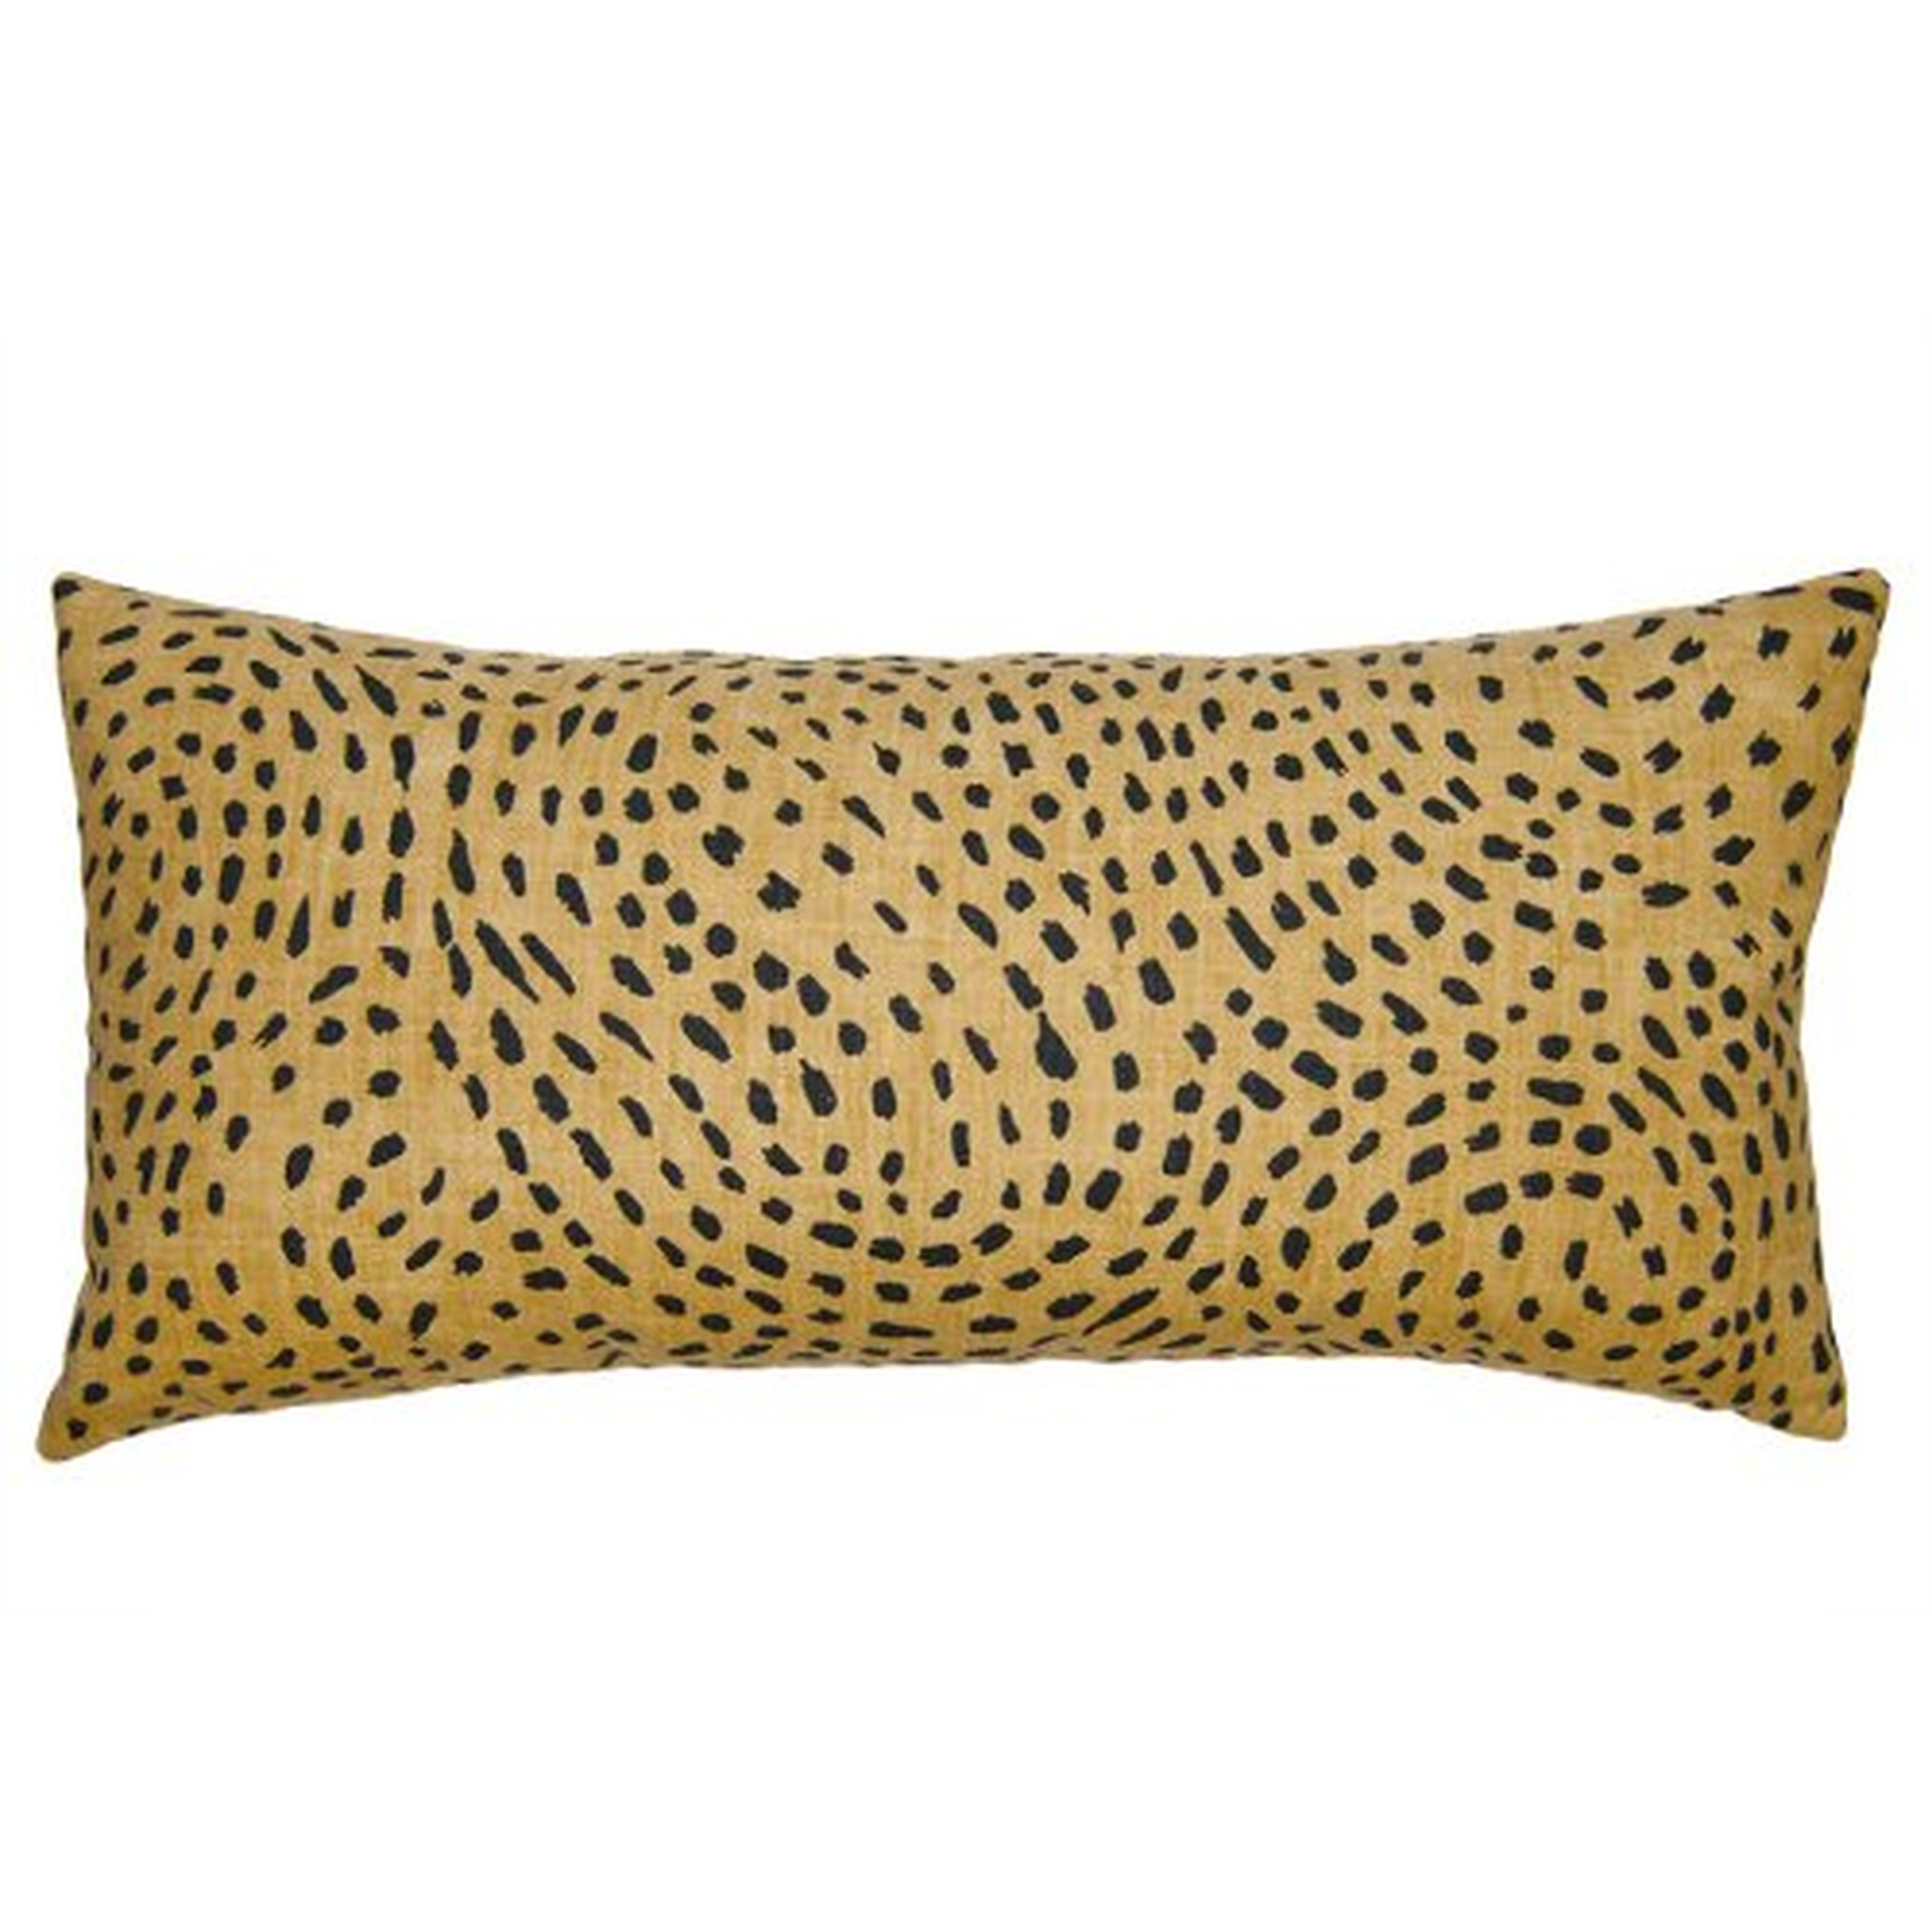 Square Feathers Kingdom Cheetah Pillow Cover & Insert - Perigold